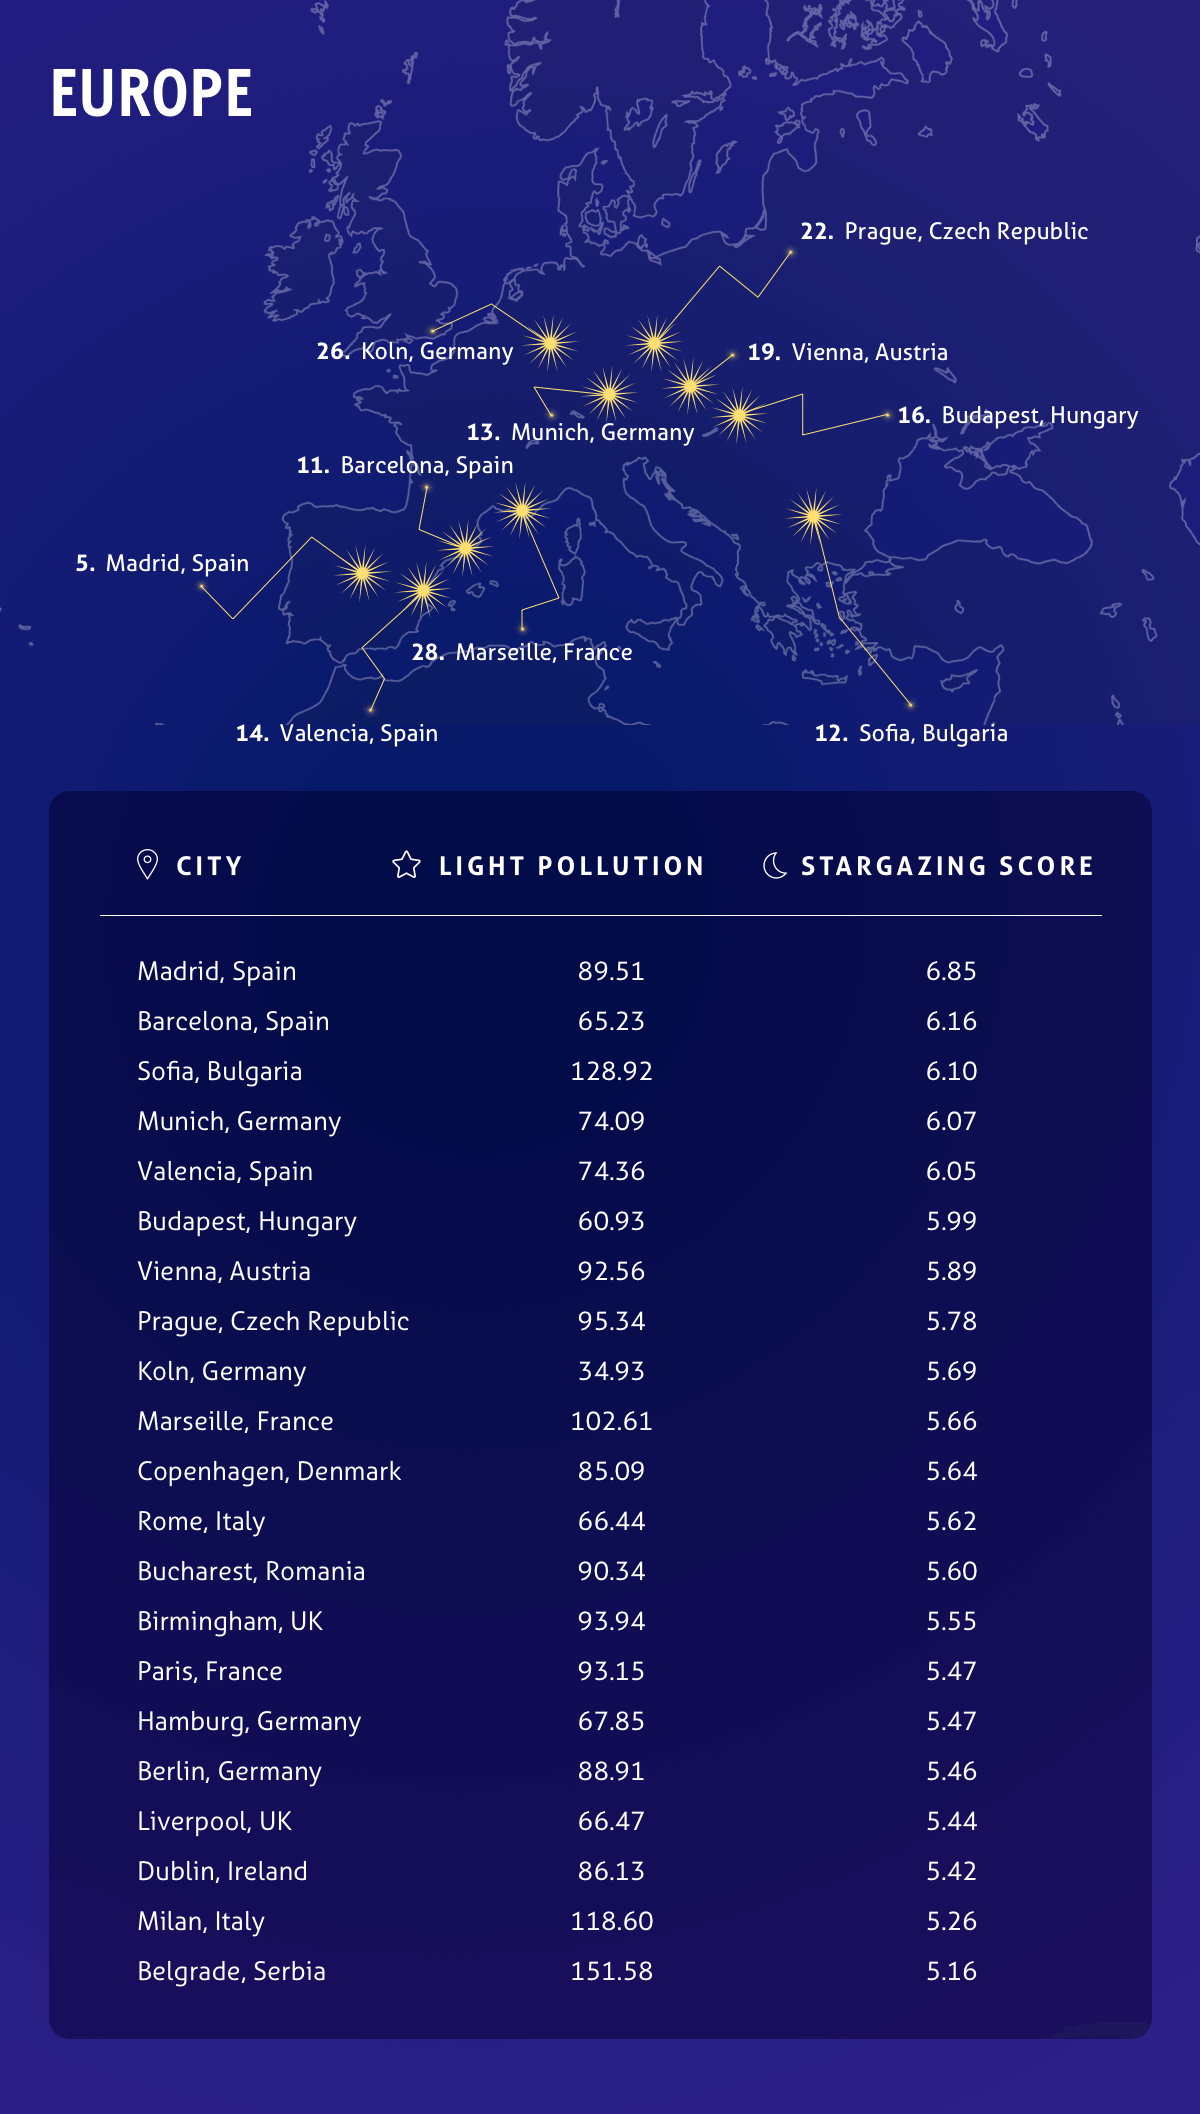 Top cities for stargazing in Europe & the UK